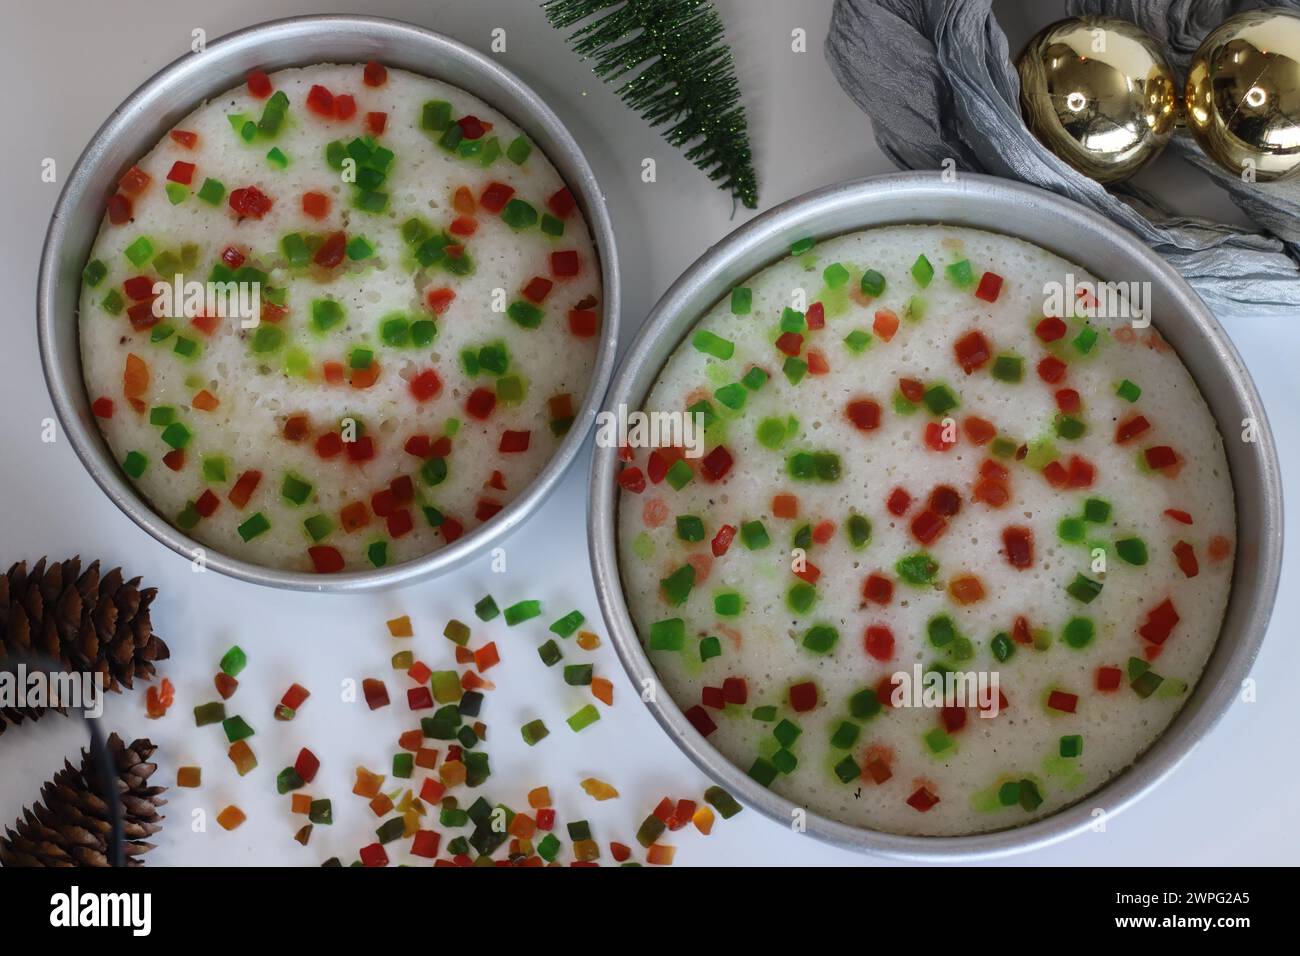 Vattayappam with tutti fruity, a Kerala sweet dish. Vattayappam is a steamed rice cake with coconut and yeast. Tutti fruity are candied fruits. Shot o Stock Photo